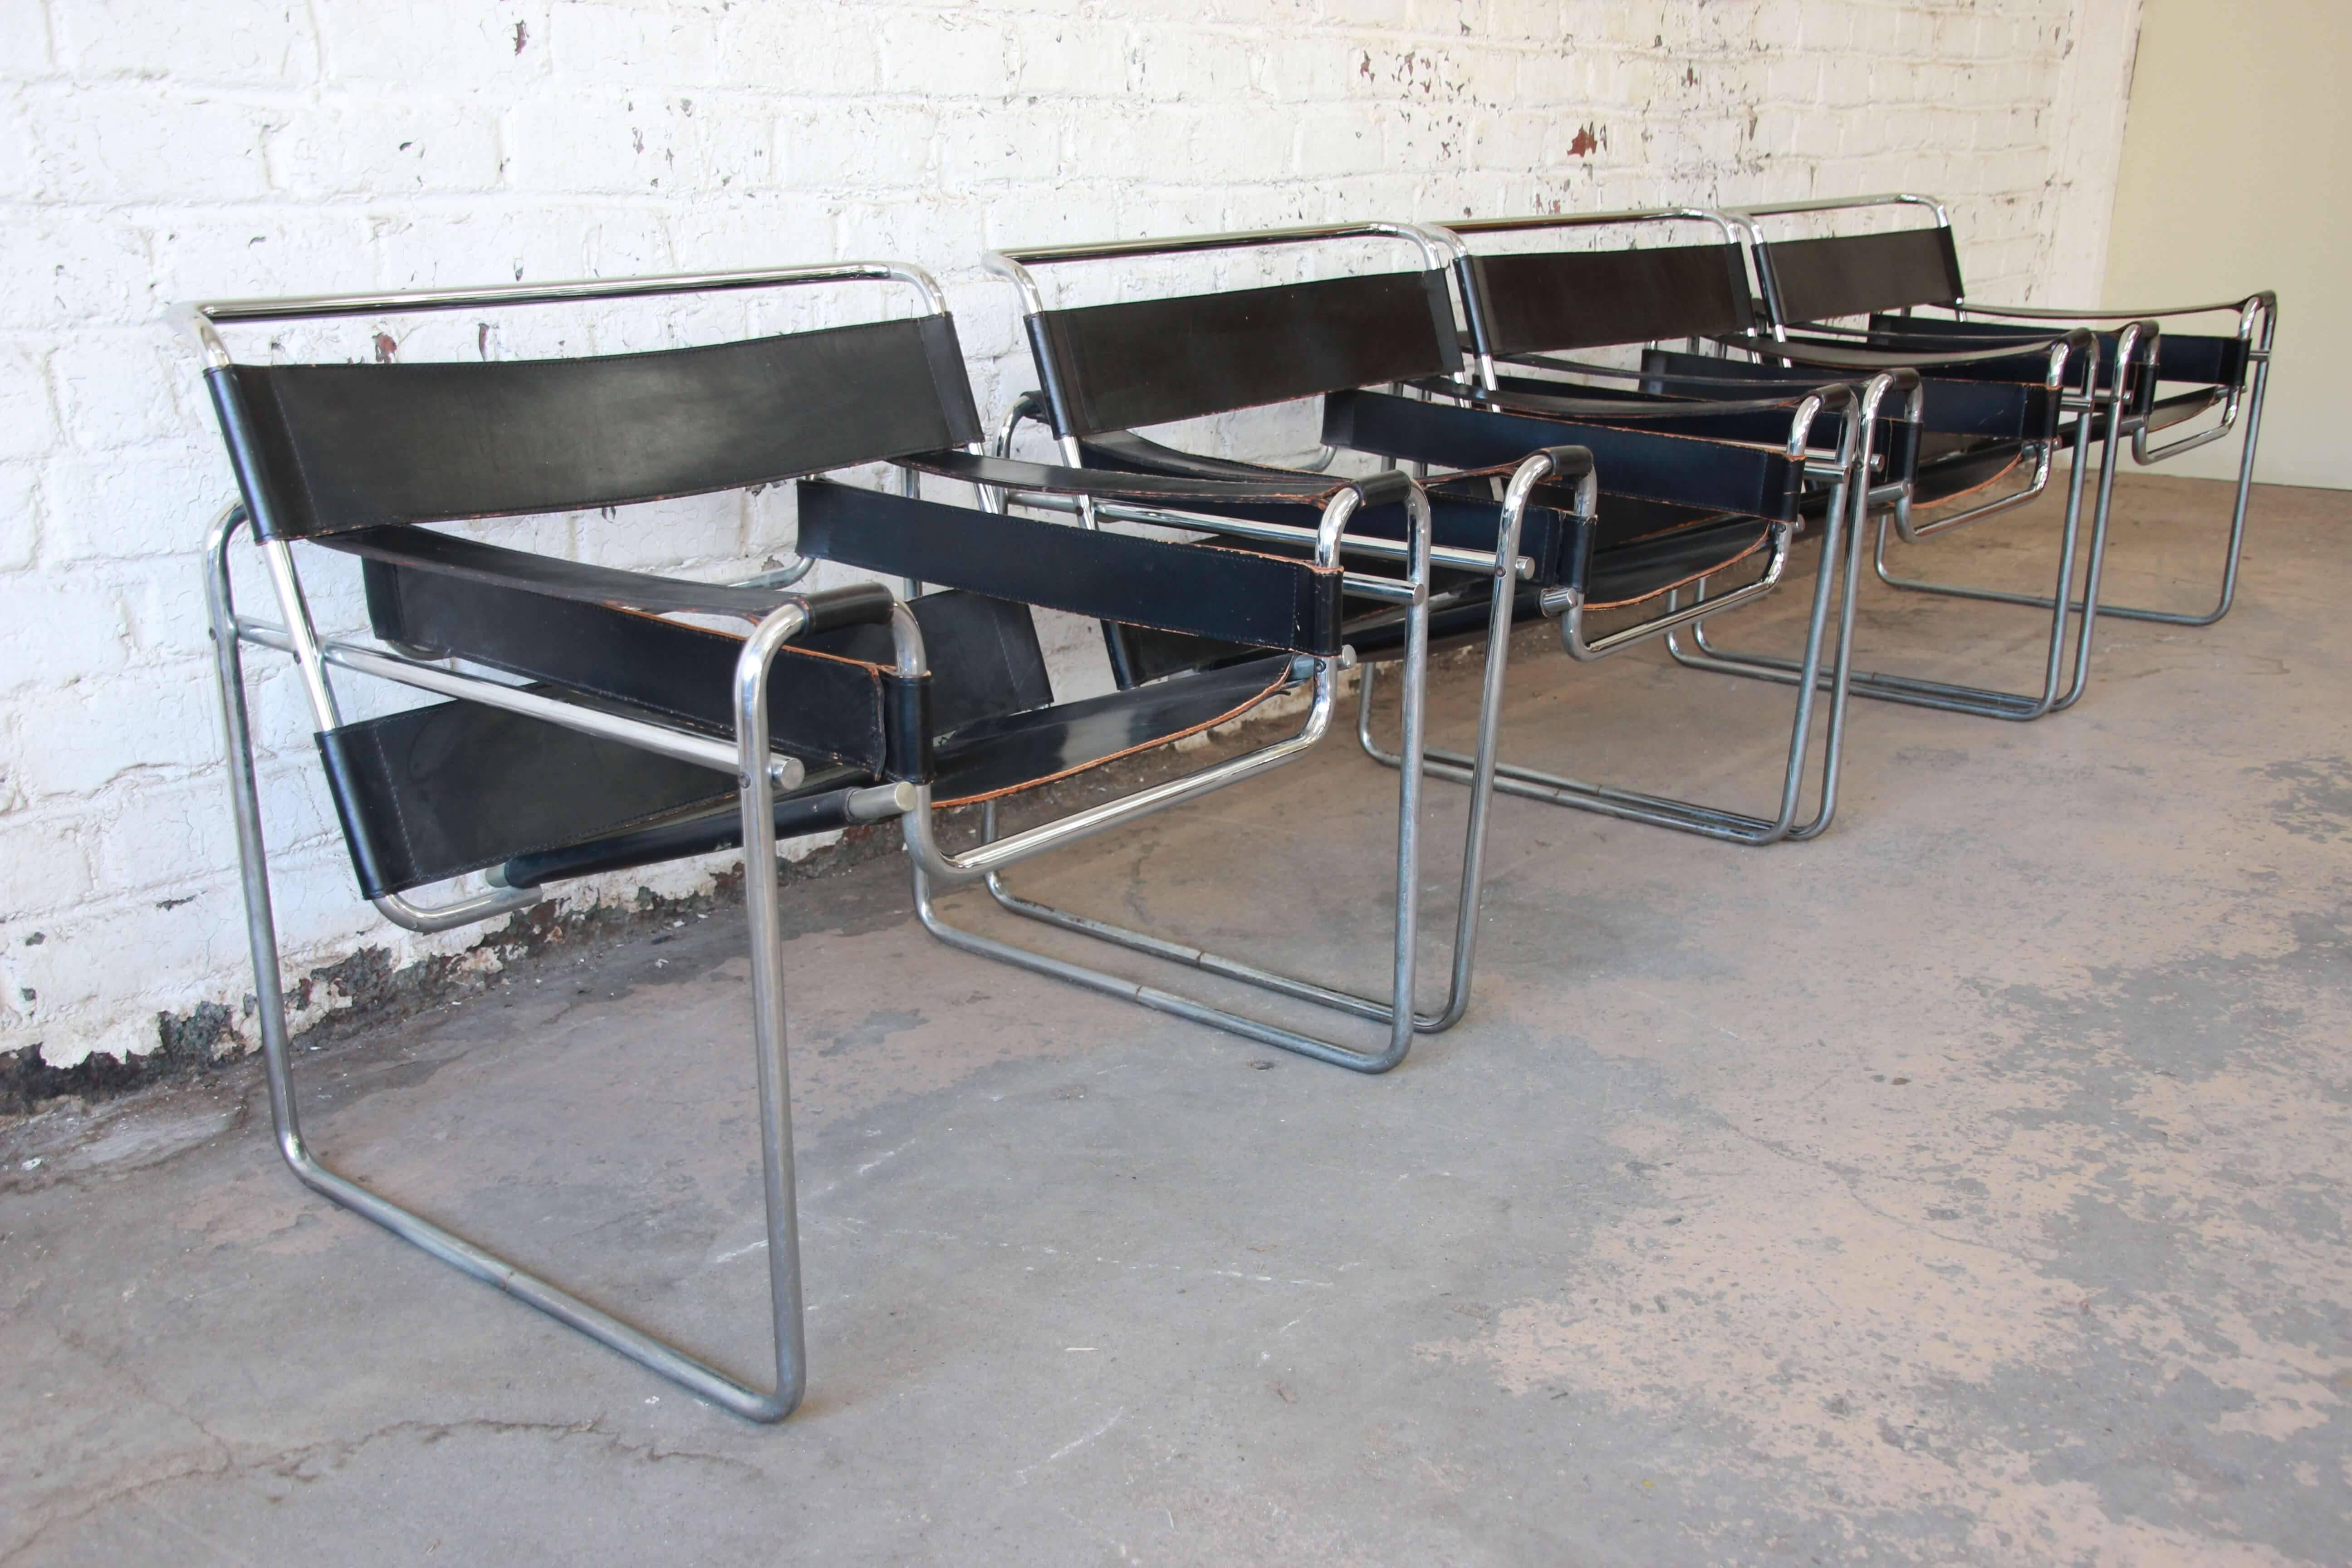 Offering black leather Wassily chairs by Marcel Breuer for Stendig. The chairs have a nice thick black leather seating armrest and backing. Each chair has a nice chrome tubular frame and all chairs are sturdy. Chairs are in good vintage condition